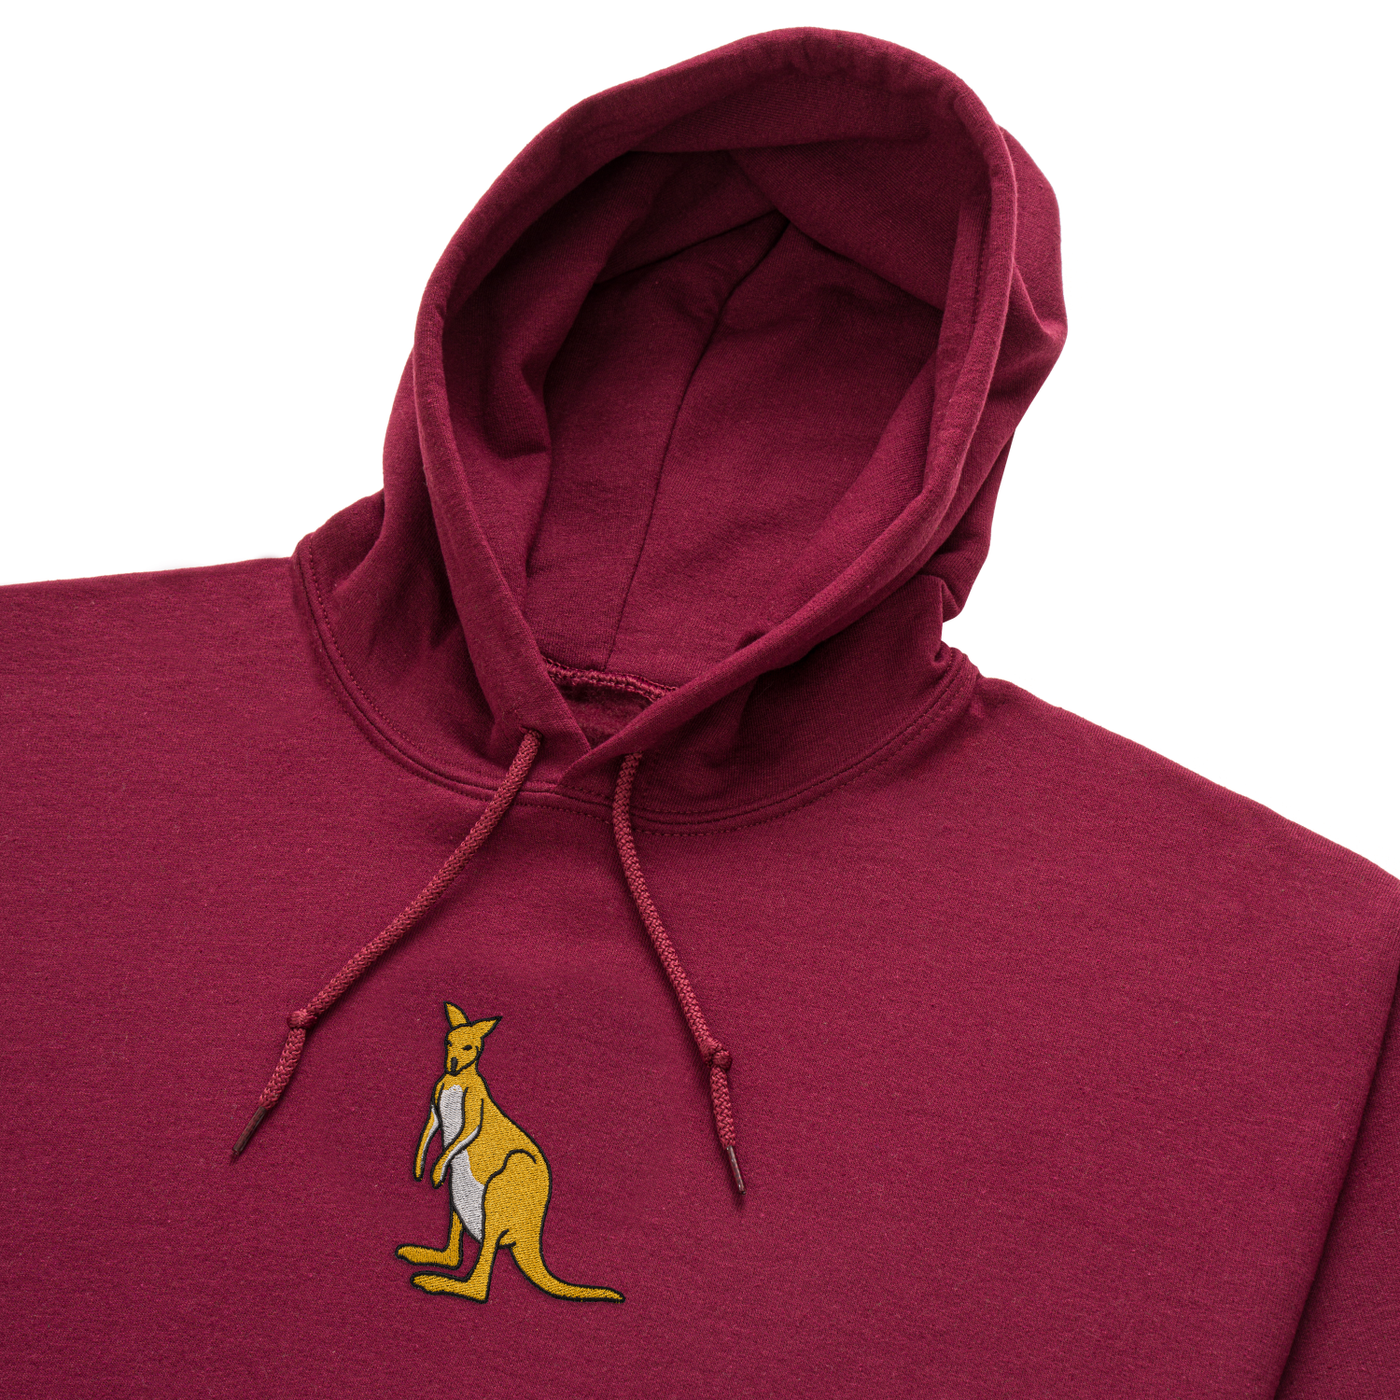 Bobby's Planet Men's Embroidered Kangaroo Hoodie from Australia Down Under Animals Collection in Maroon Color#color_maroon